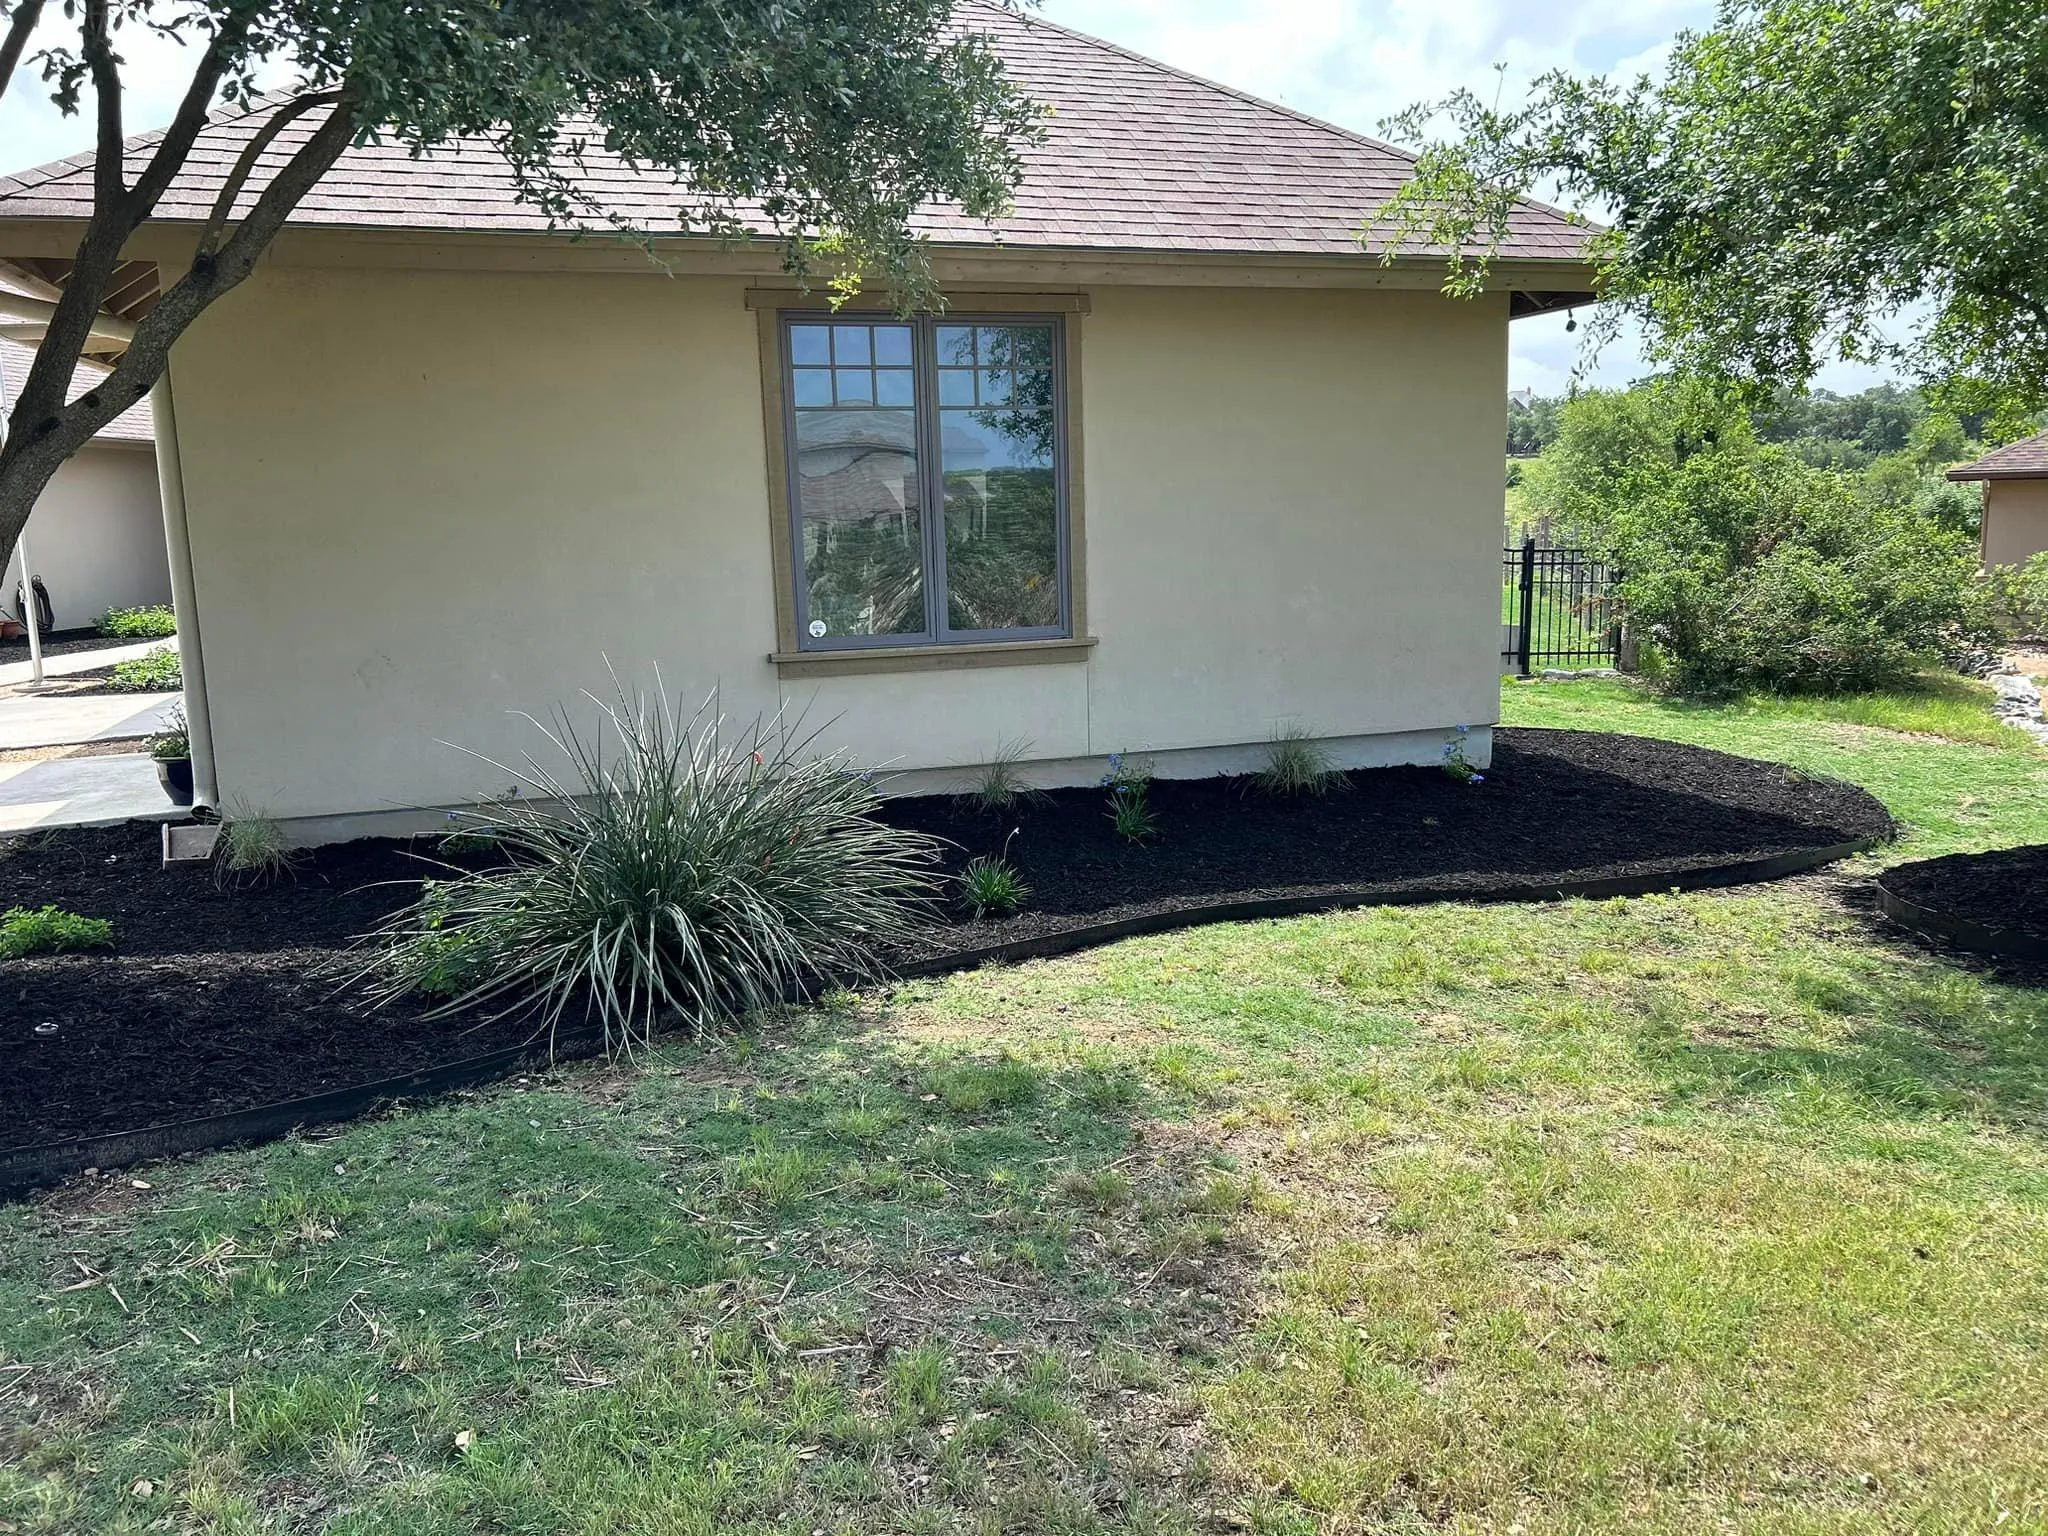 Mowing for C & C Lawn Care and Maintenance in New Braunfels, TX